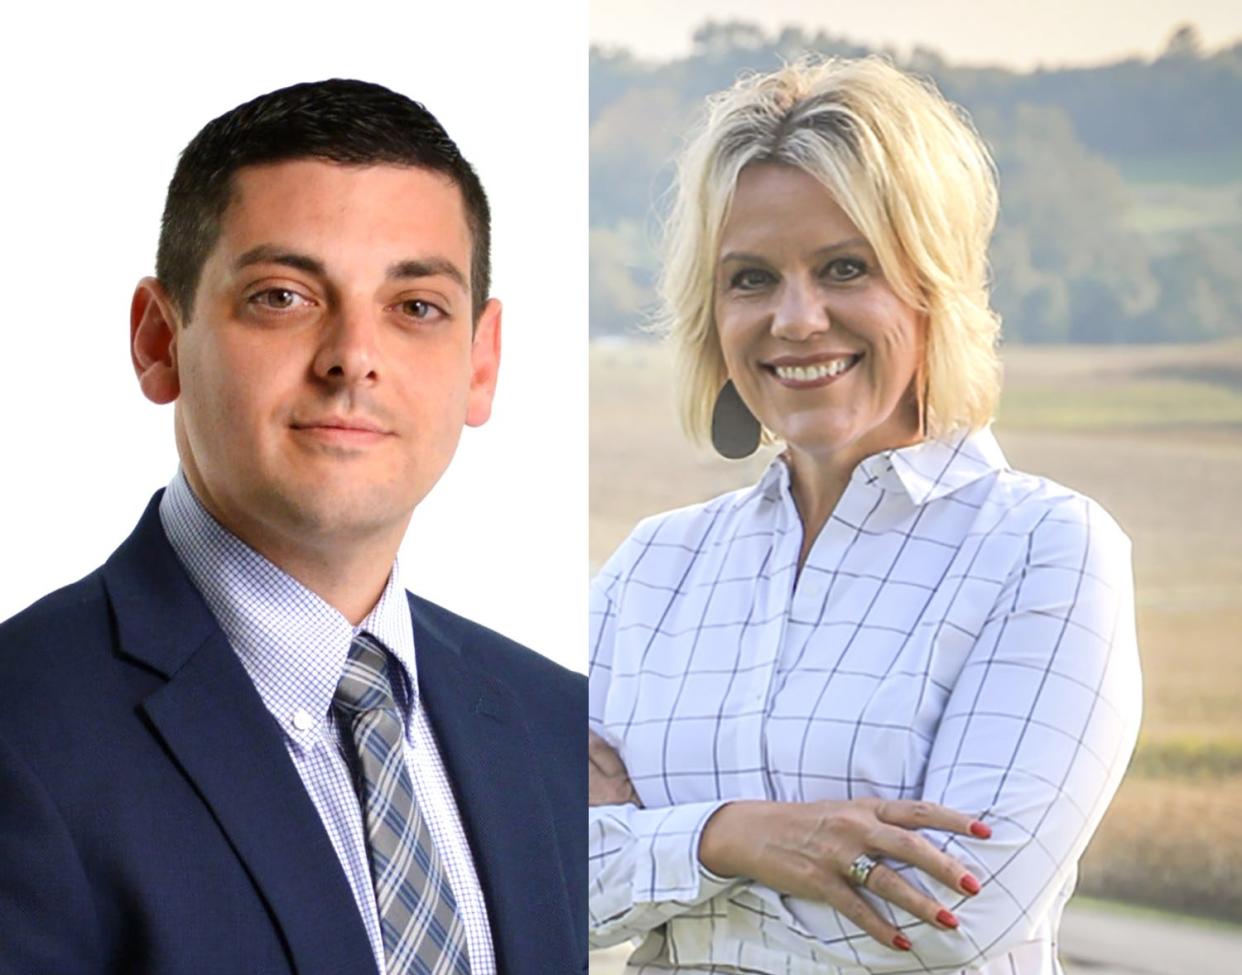 Republican candidates for Muskingum County Commissioner Anthony Adornetto, left, and Melissa Bell.